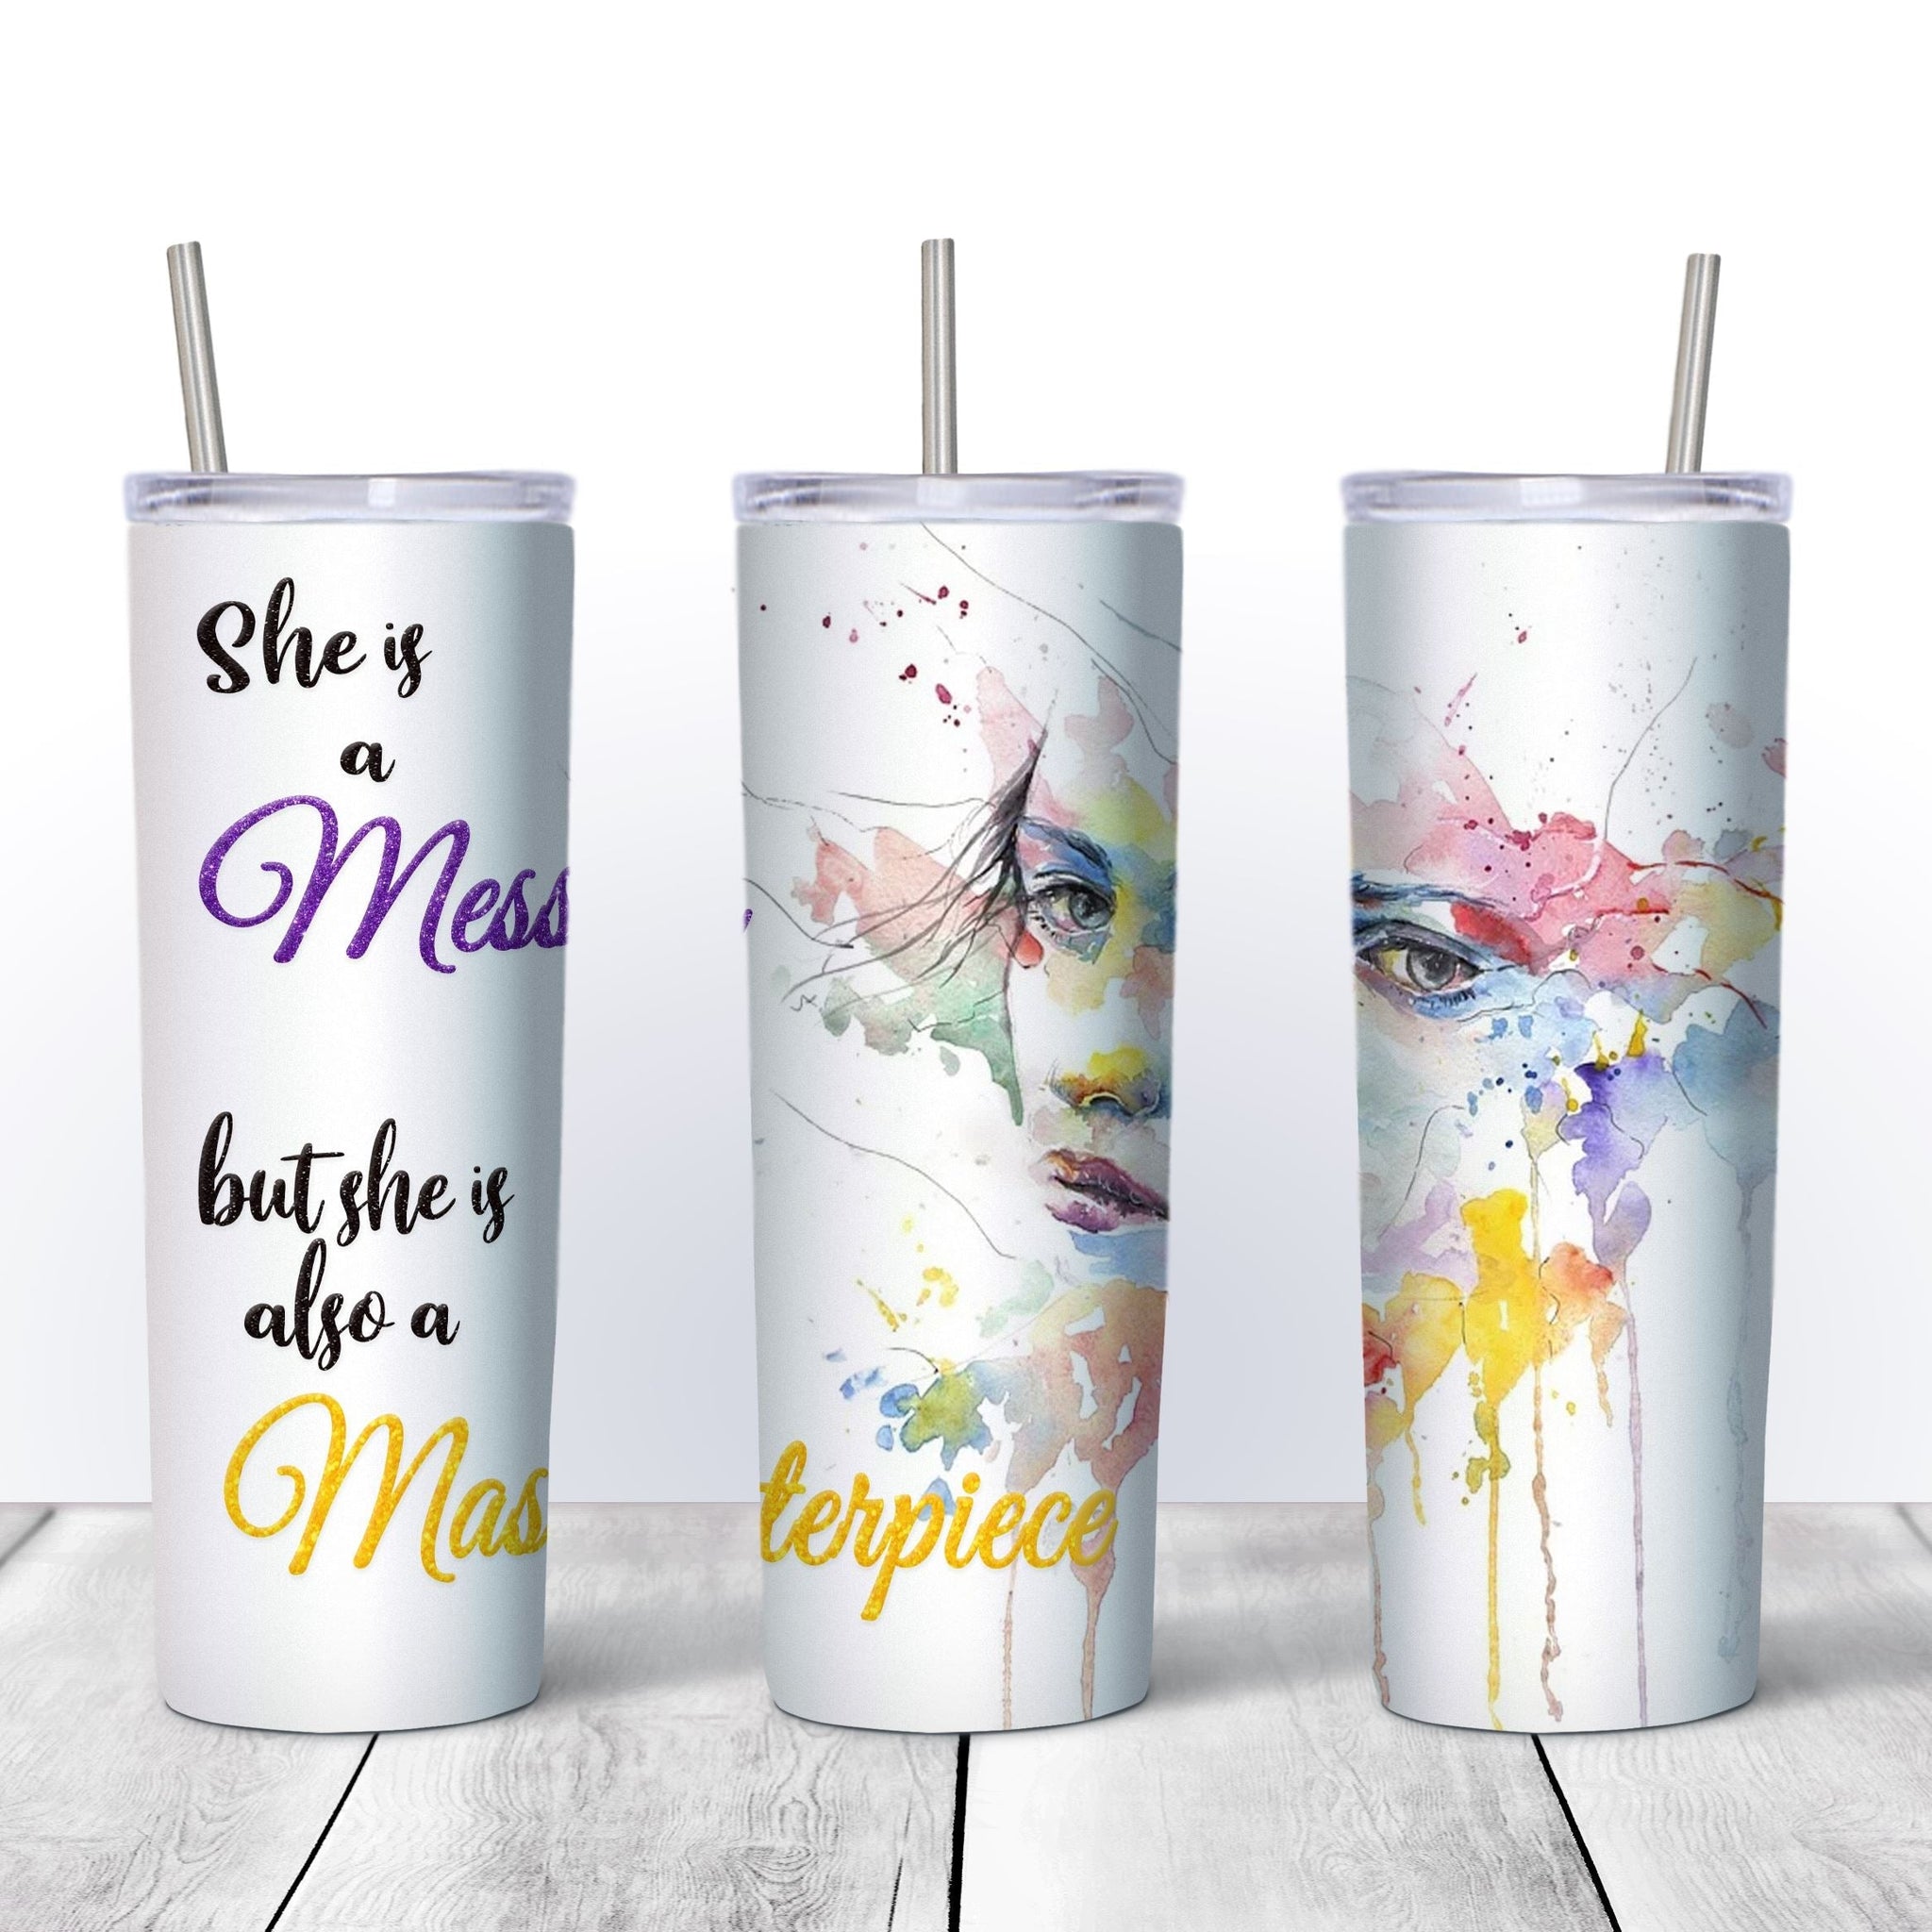 Sublimation tumbler help! We are new to sublimation and have had great luck  with shirts but when we try tumblers we get blank spots on the top and  bottom. We use A